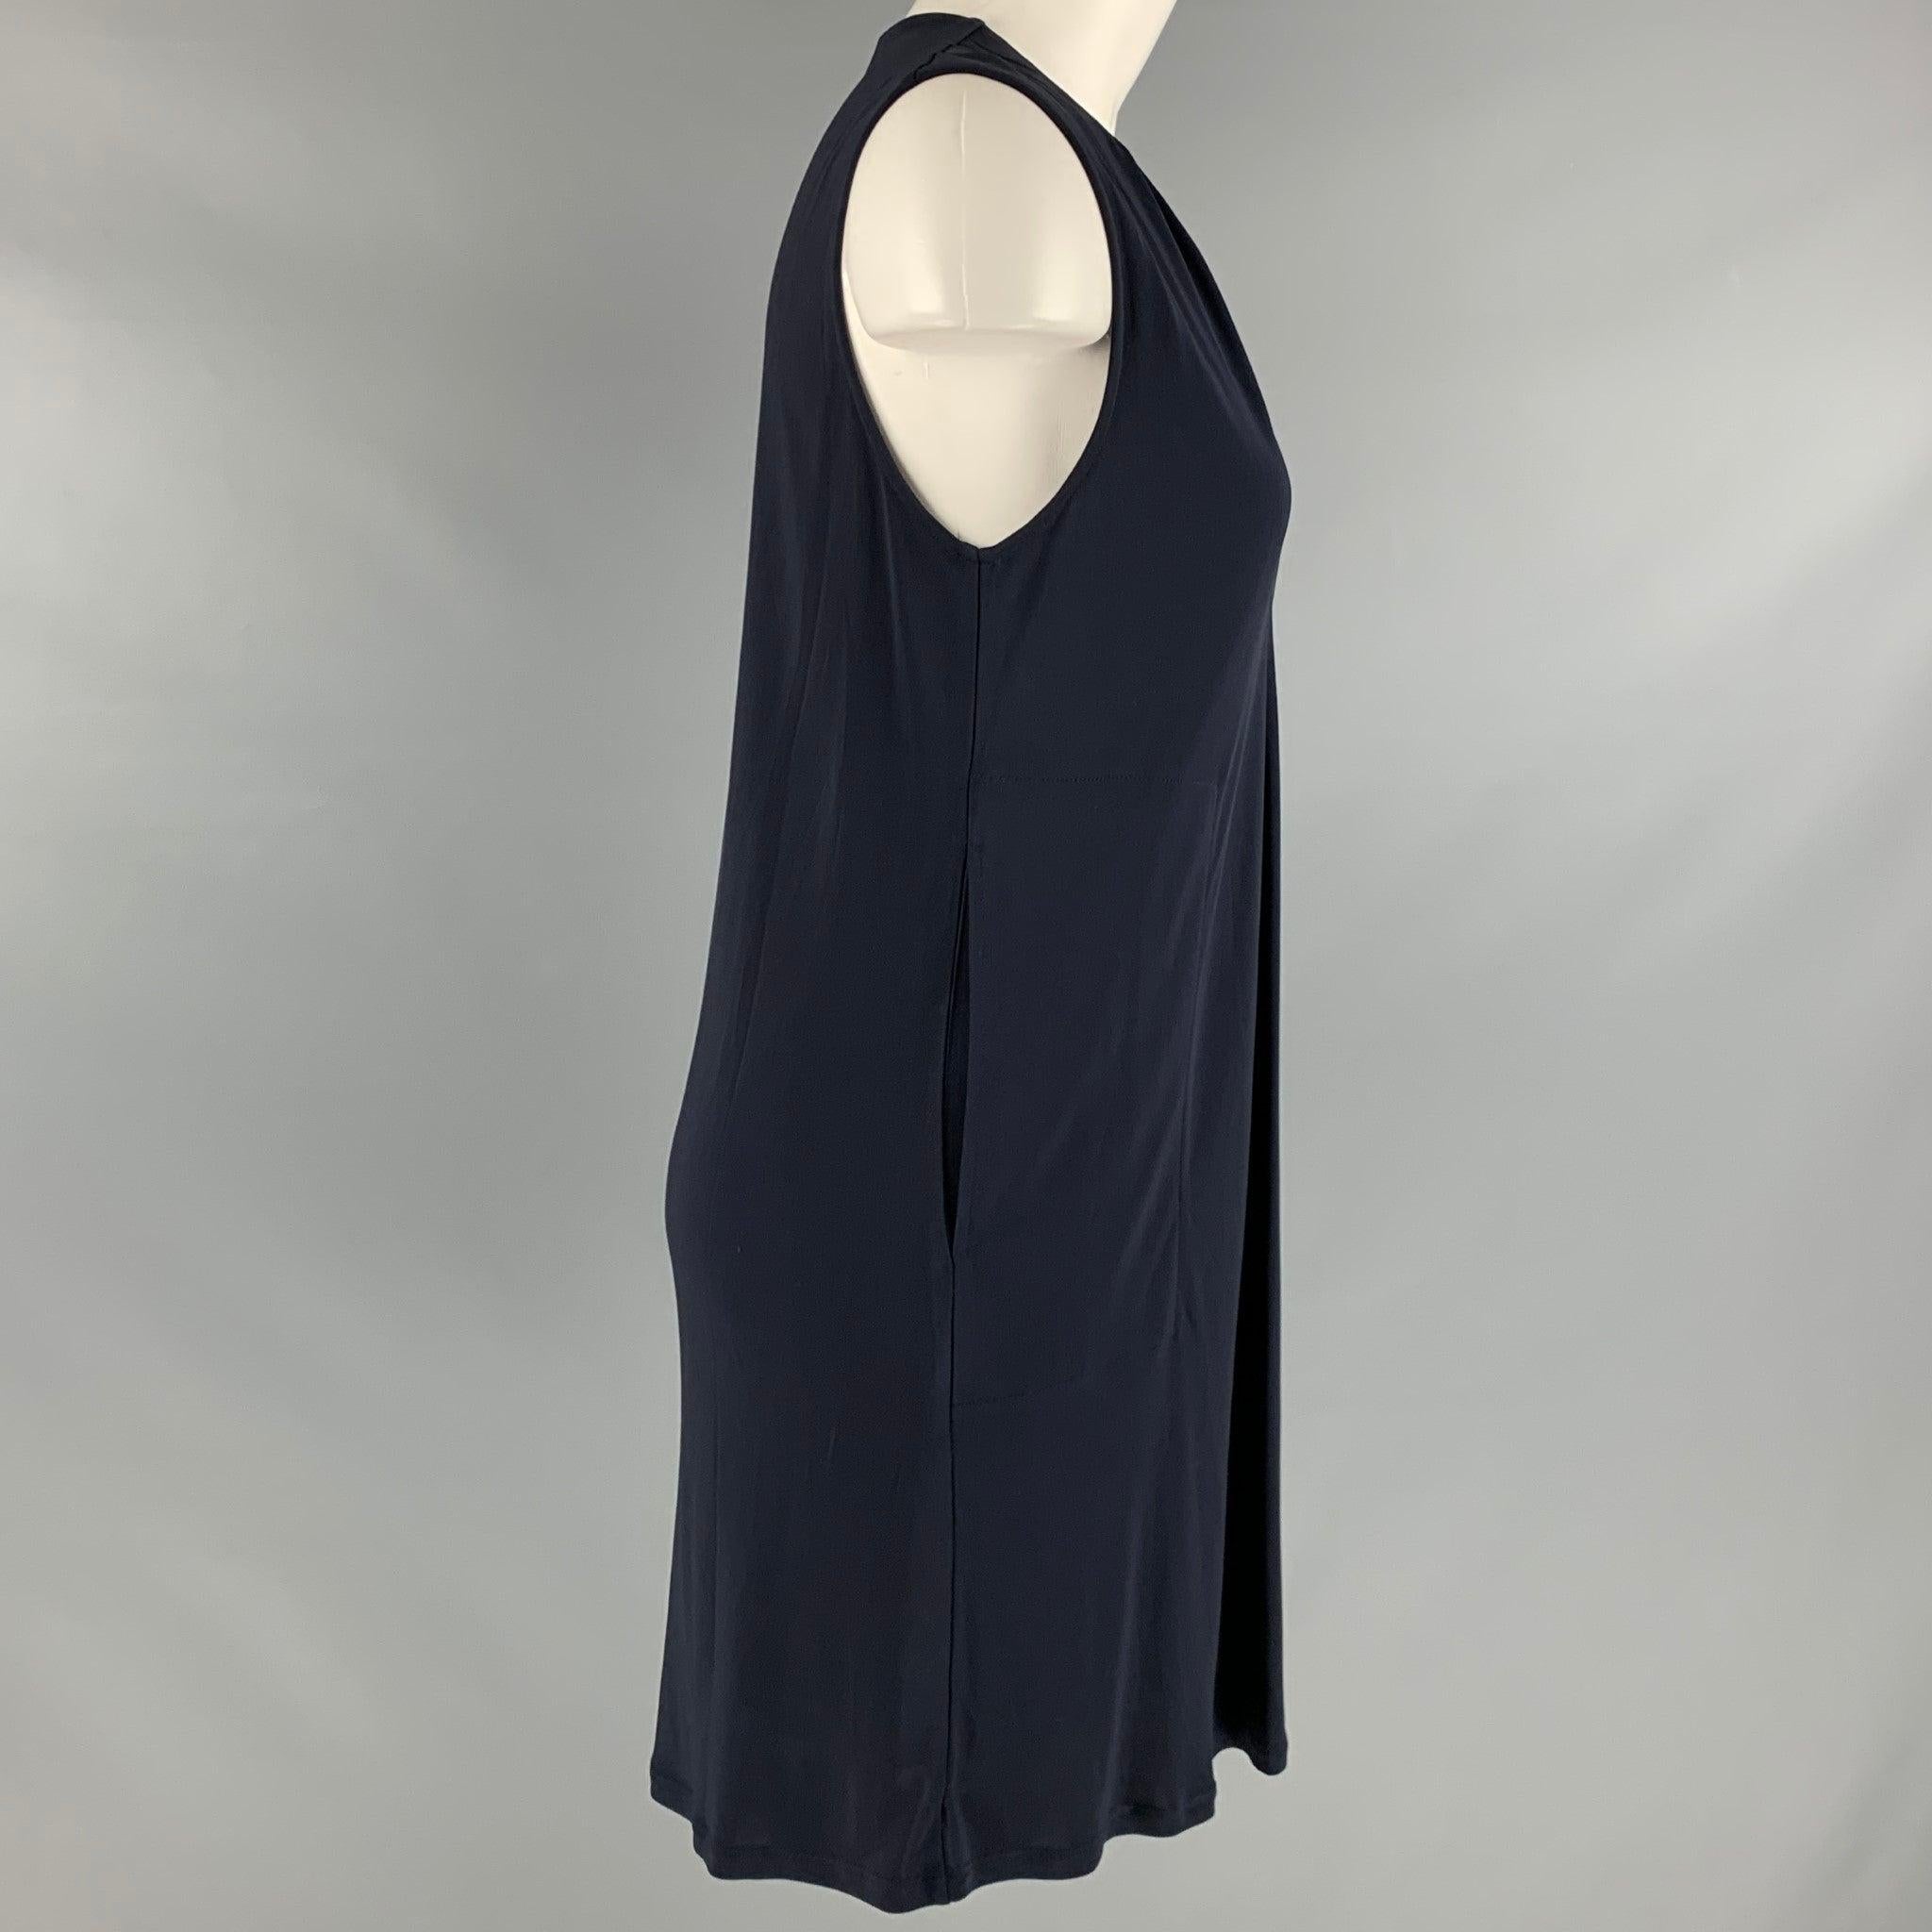 HELMUT LANG dress in a navy viscose fabric featuring a sleeveless A-line style, and two pockets.Very Good Pre-Owned Condition. Marks on front. As-is. 

Marked:  XS 

Measurements: 
 
Shoulder: 15 inches Bust: 32 inches Length: 34 inches 
 
